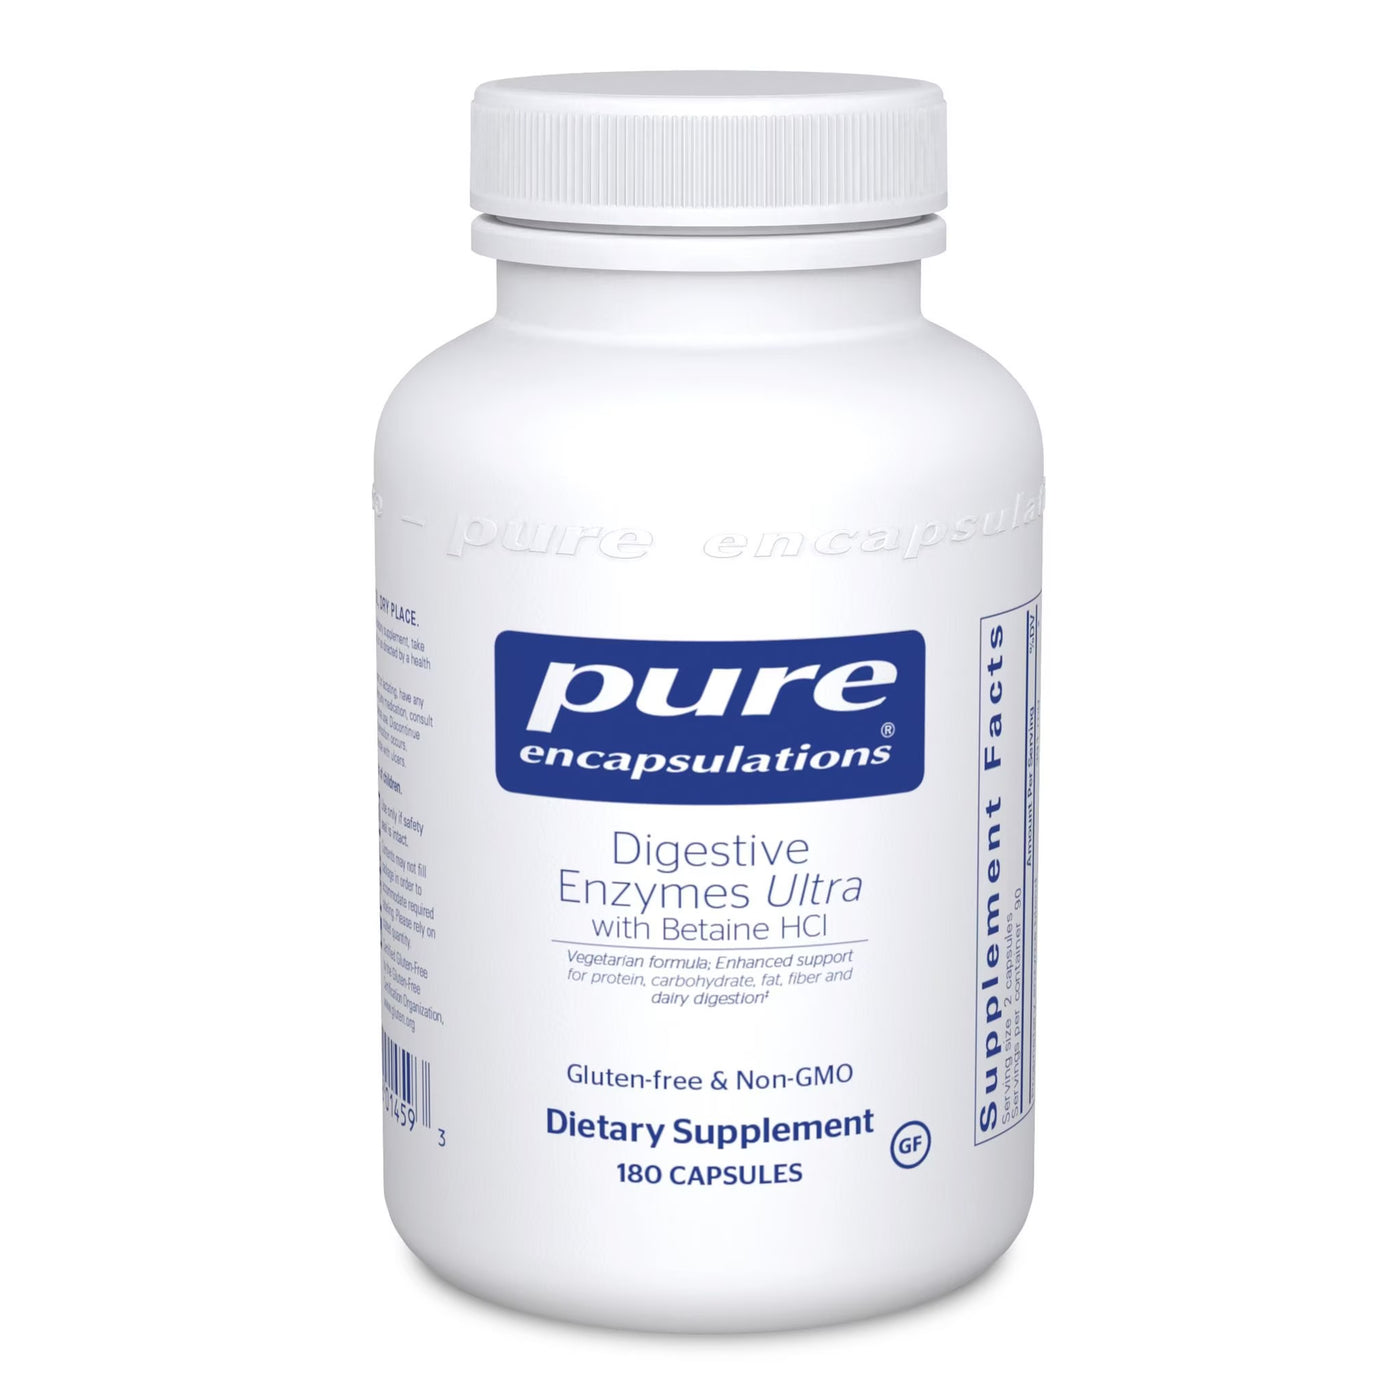 Digestive Enzymes Ultra (Betaine HCI)